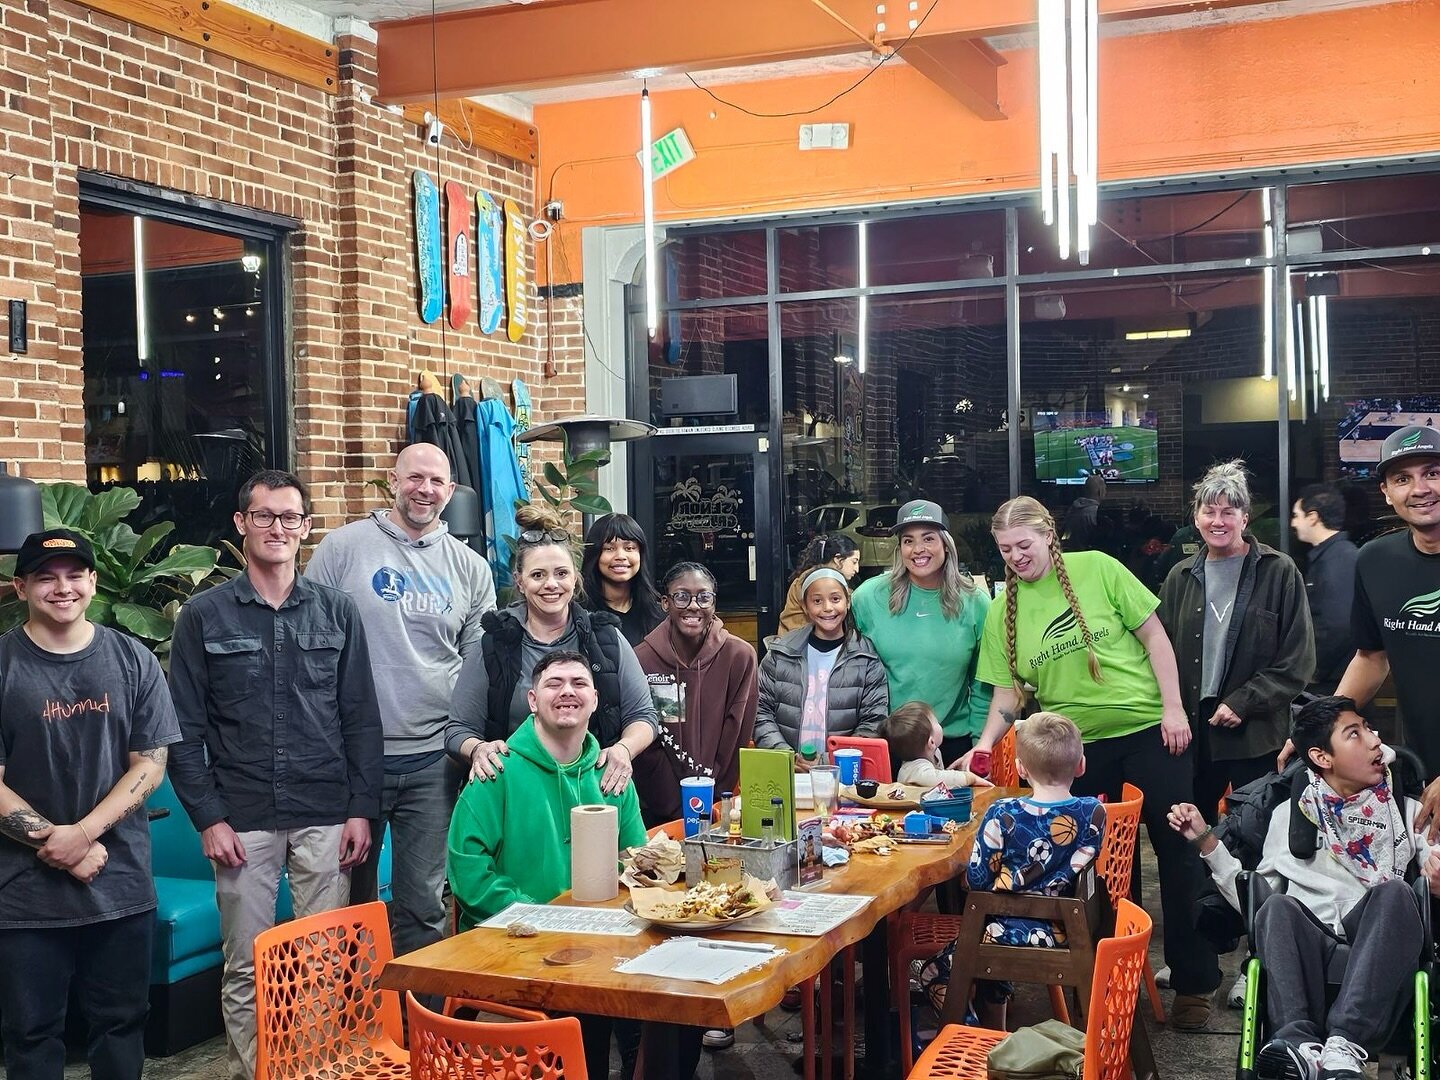 When new friends become family the world becomes a better place! @thekookrun and @right_hand_angels_ gathered tonight at @senorgrubbys in Oceanside to break bread and prepare for an awesome race this weekend! A huge thank you to @jeffstoner_official,